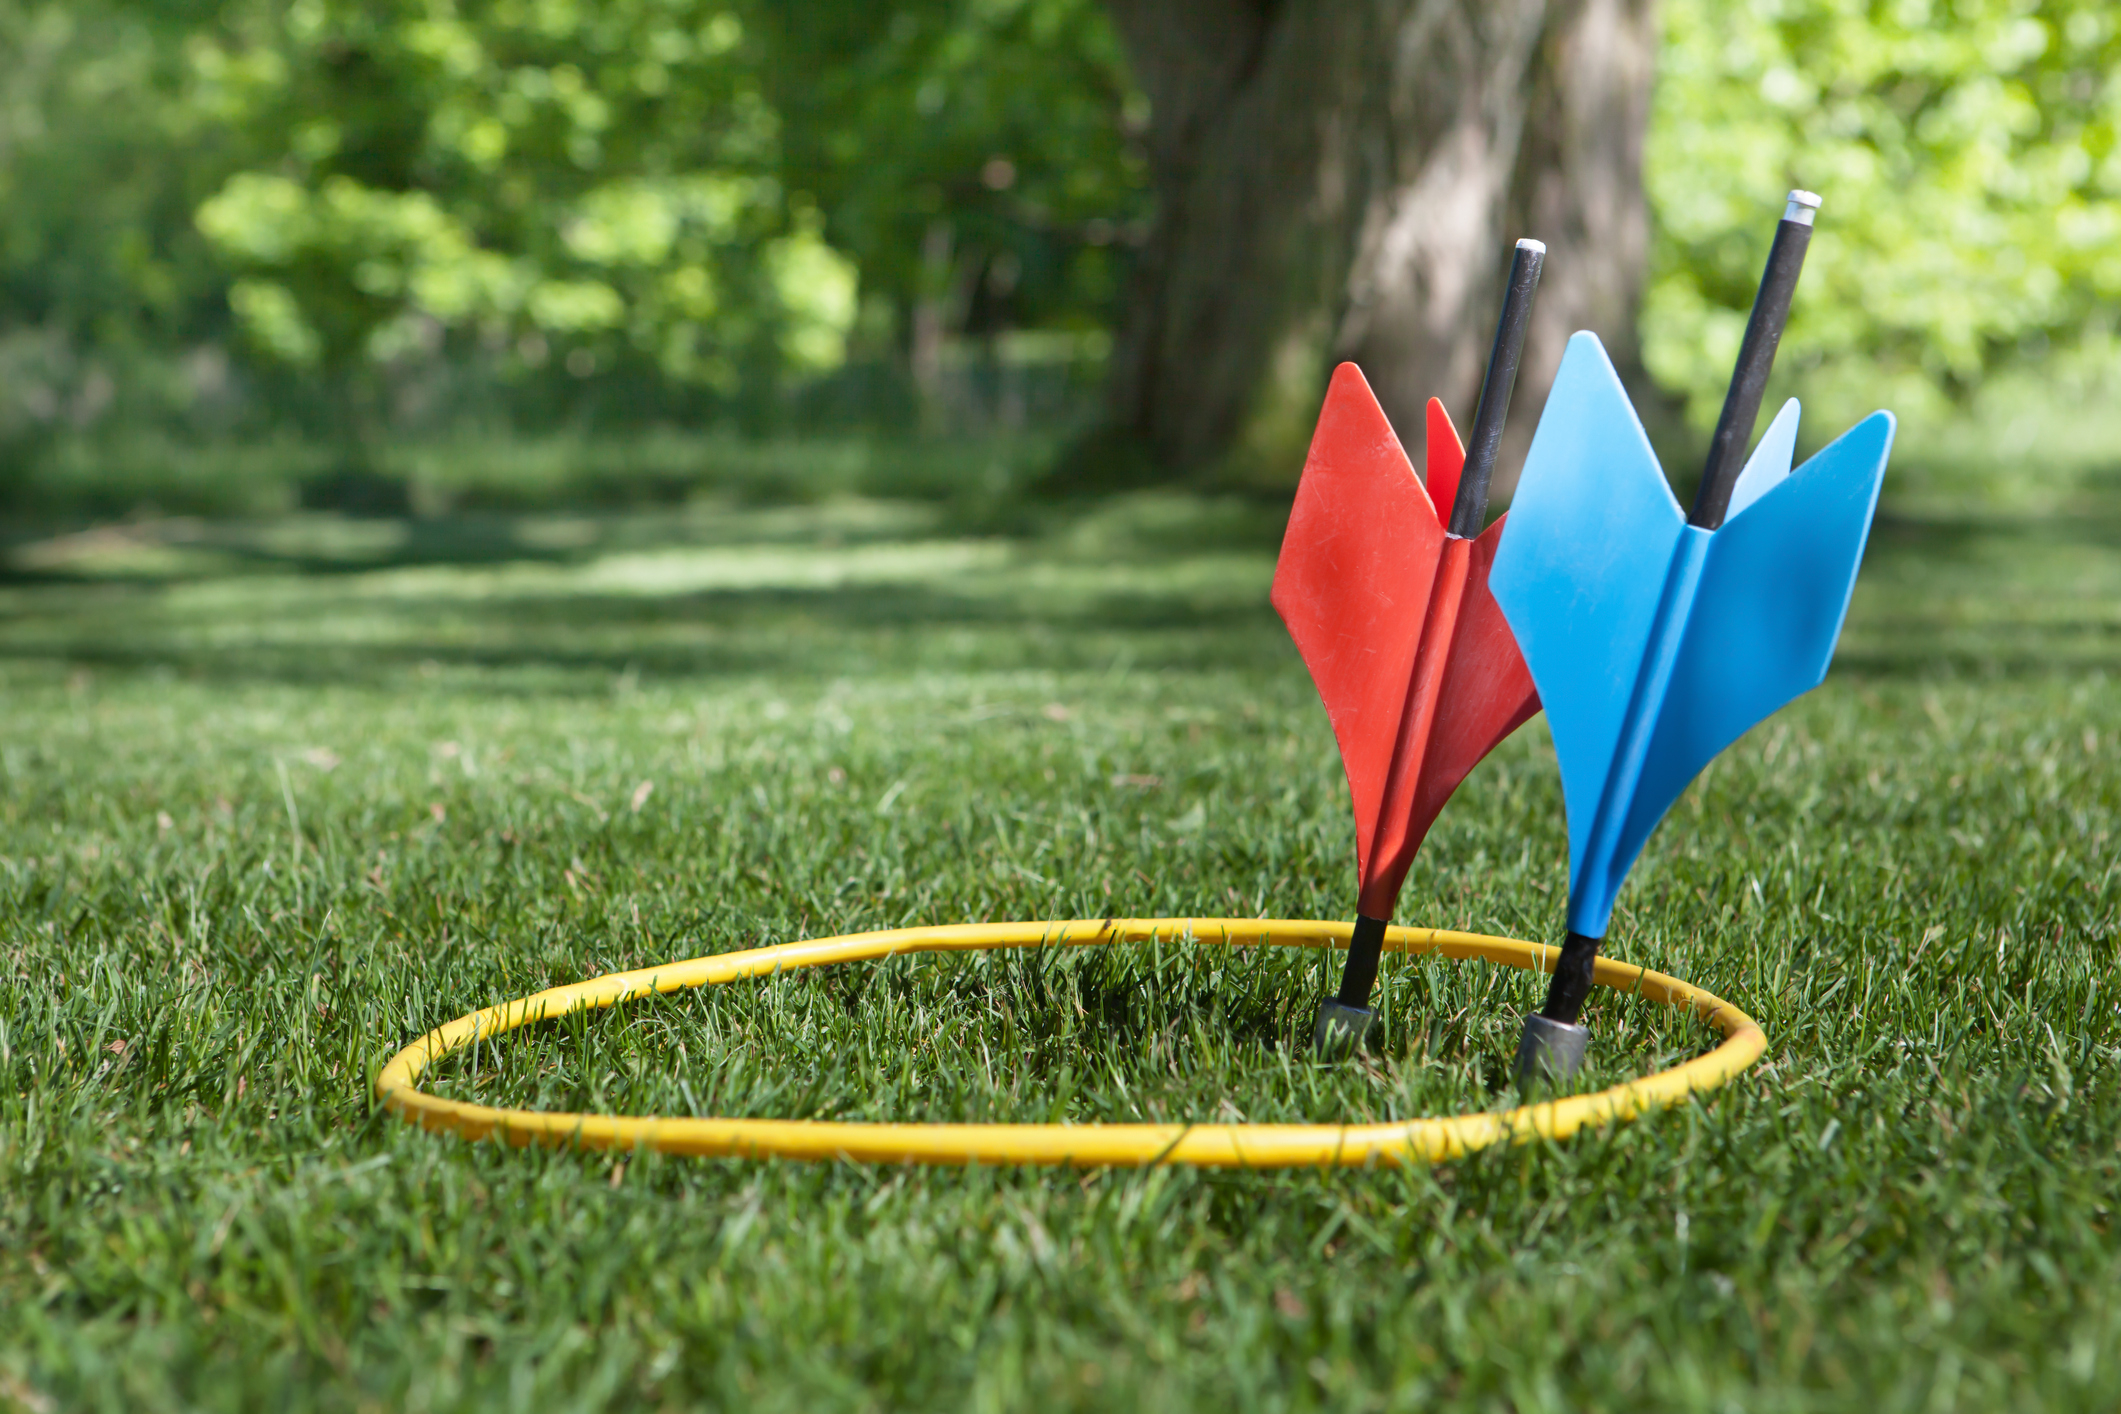 Lawn darts in the grass